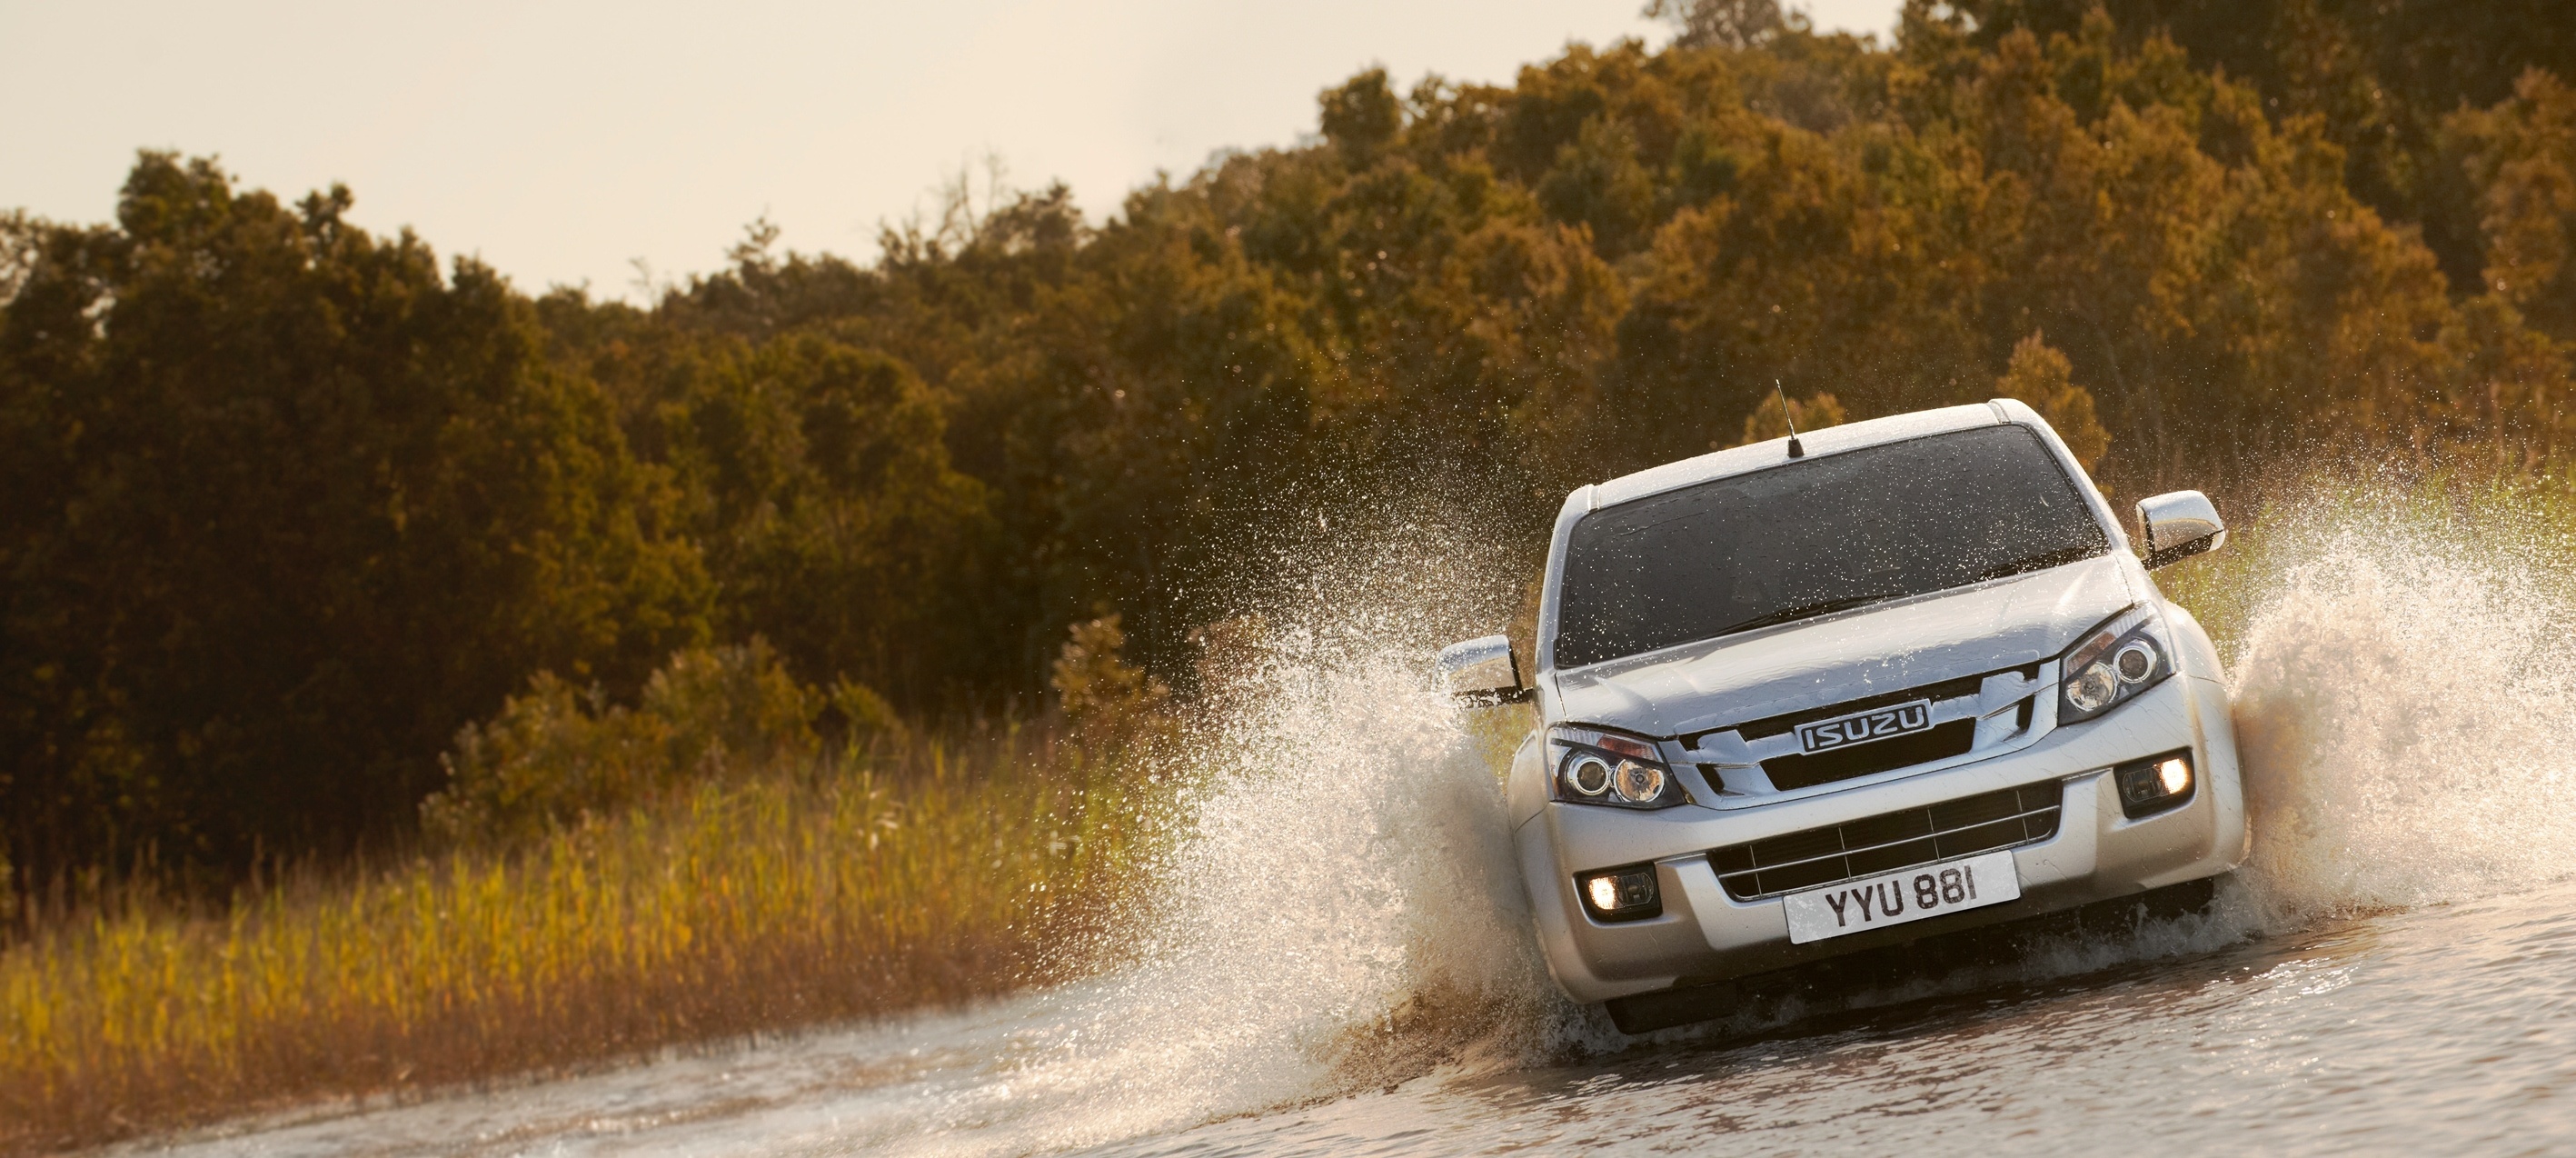 ISUZU Auto, D-Max wallpapers, Bold and powerful, Unmatched versatility, 2840x1280 Dual Screen Desktop